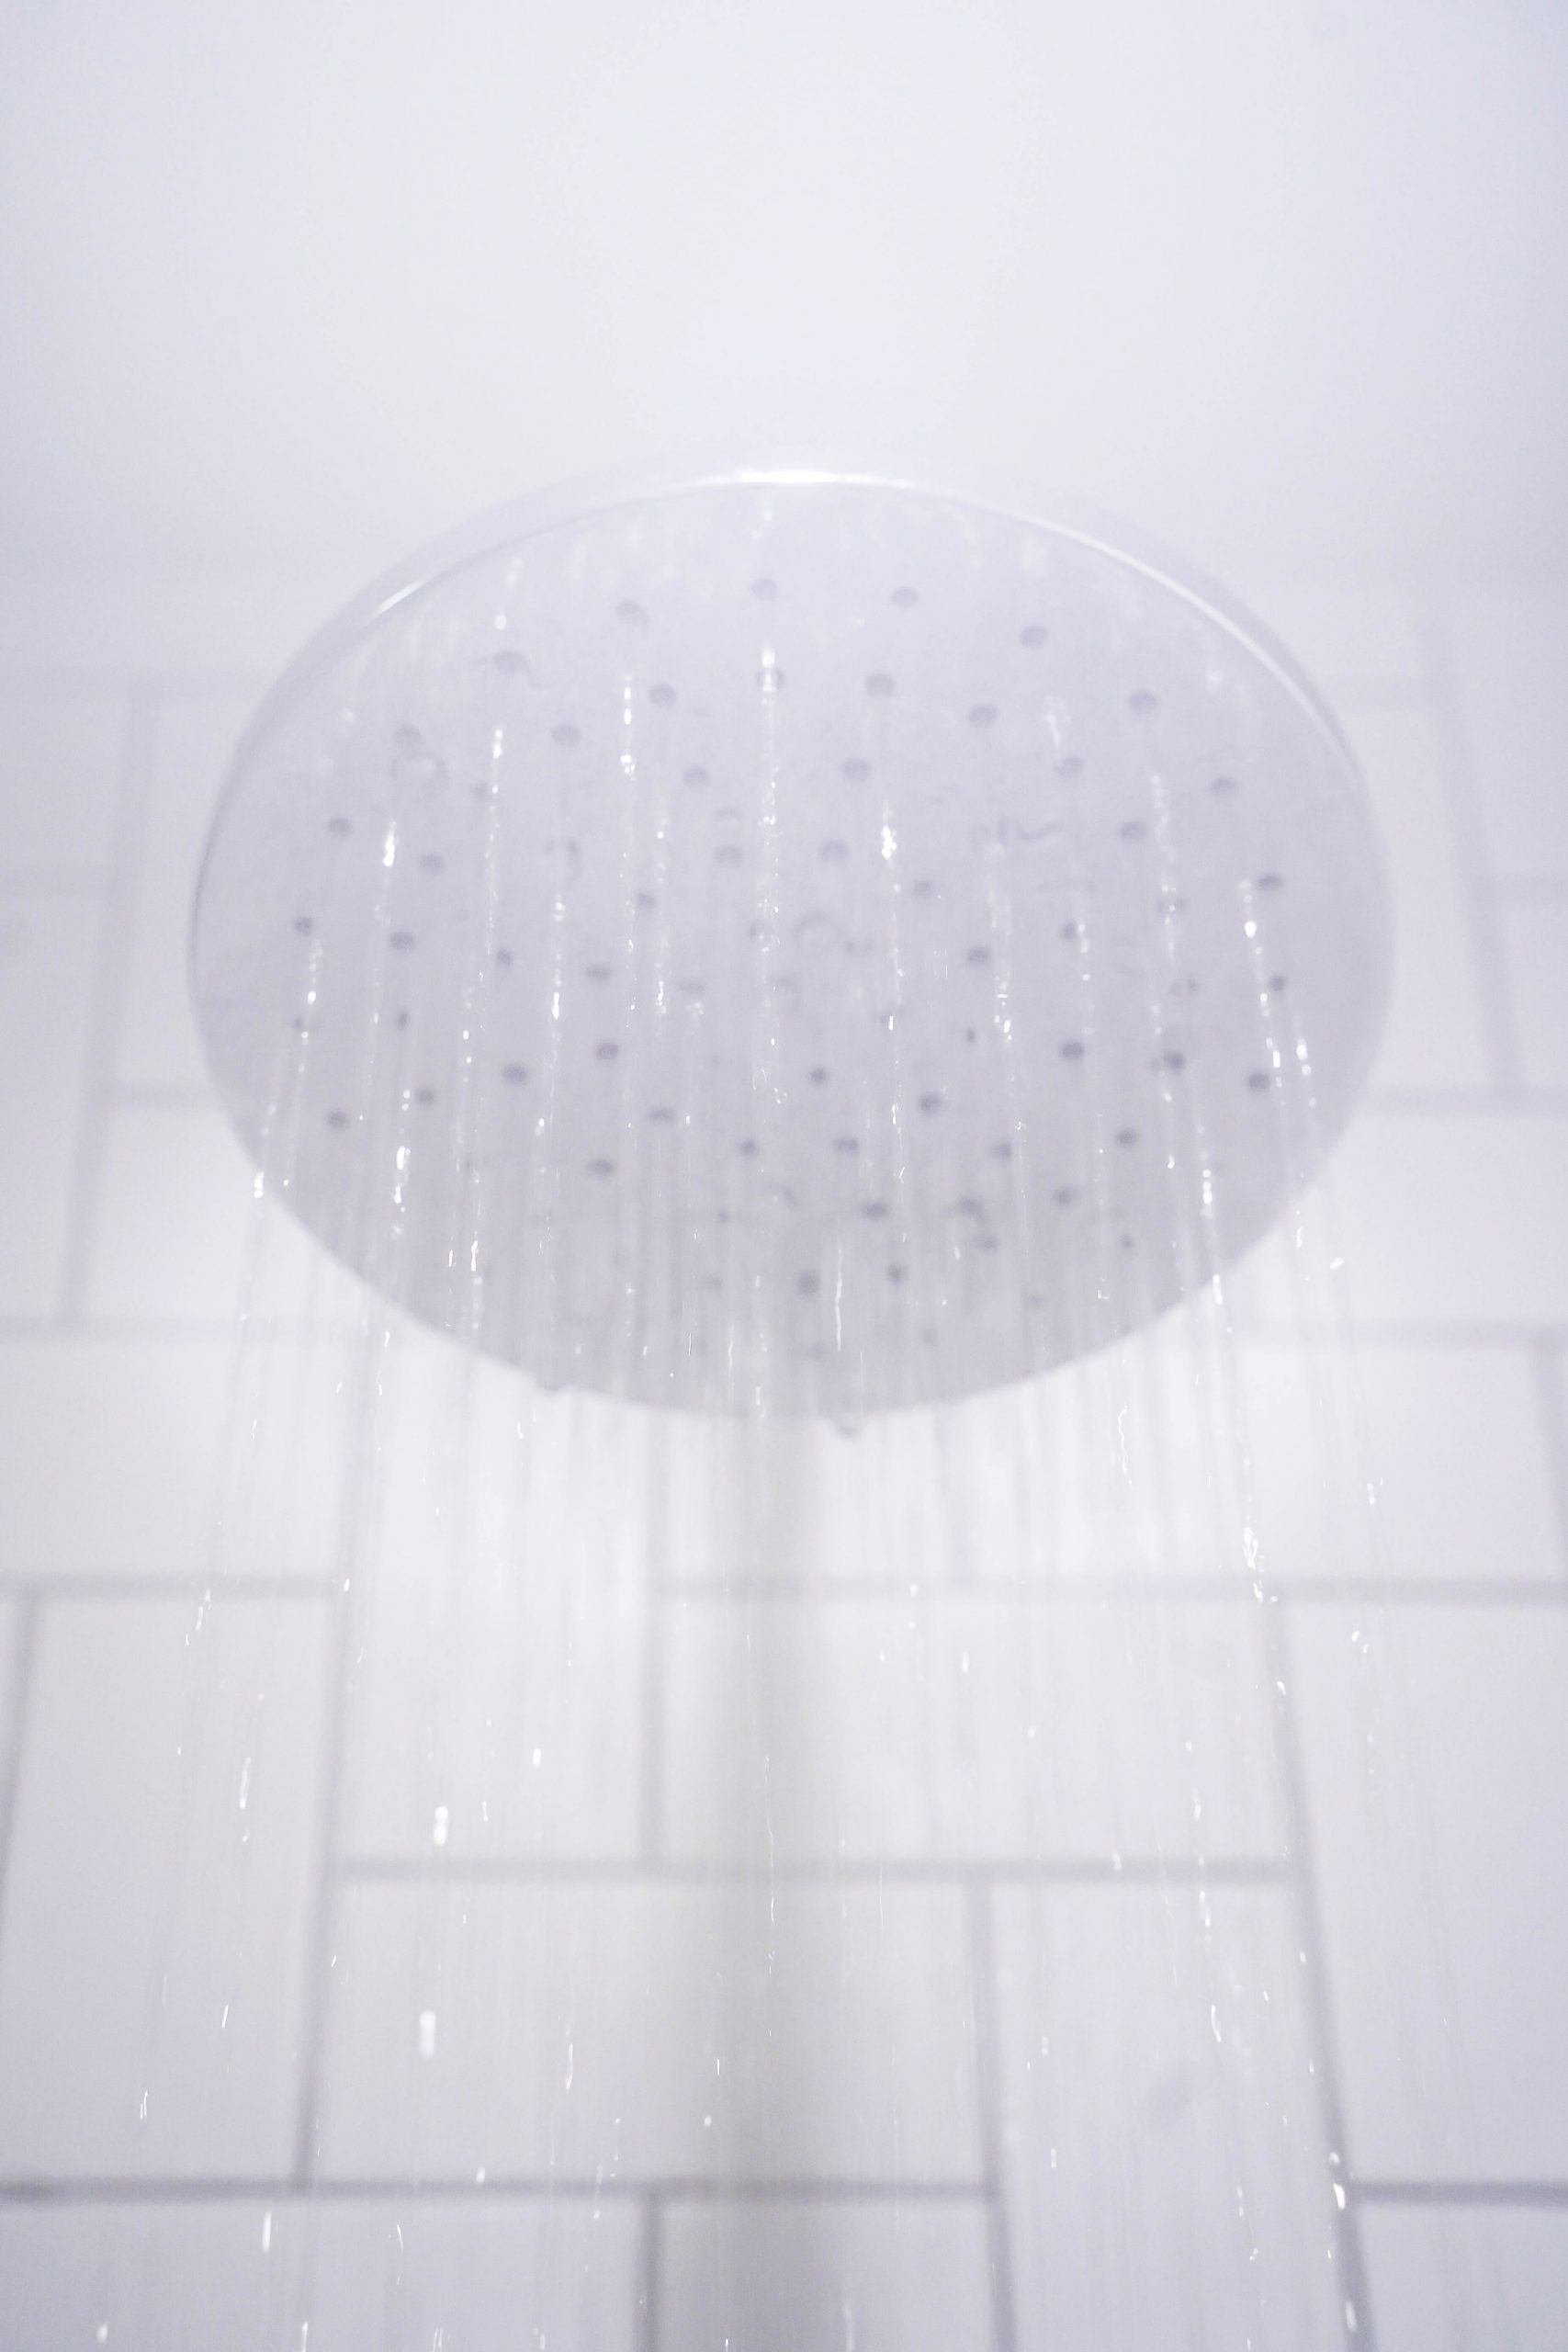 Have a shorter shower to keep warm and save electricity this winter.